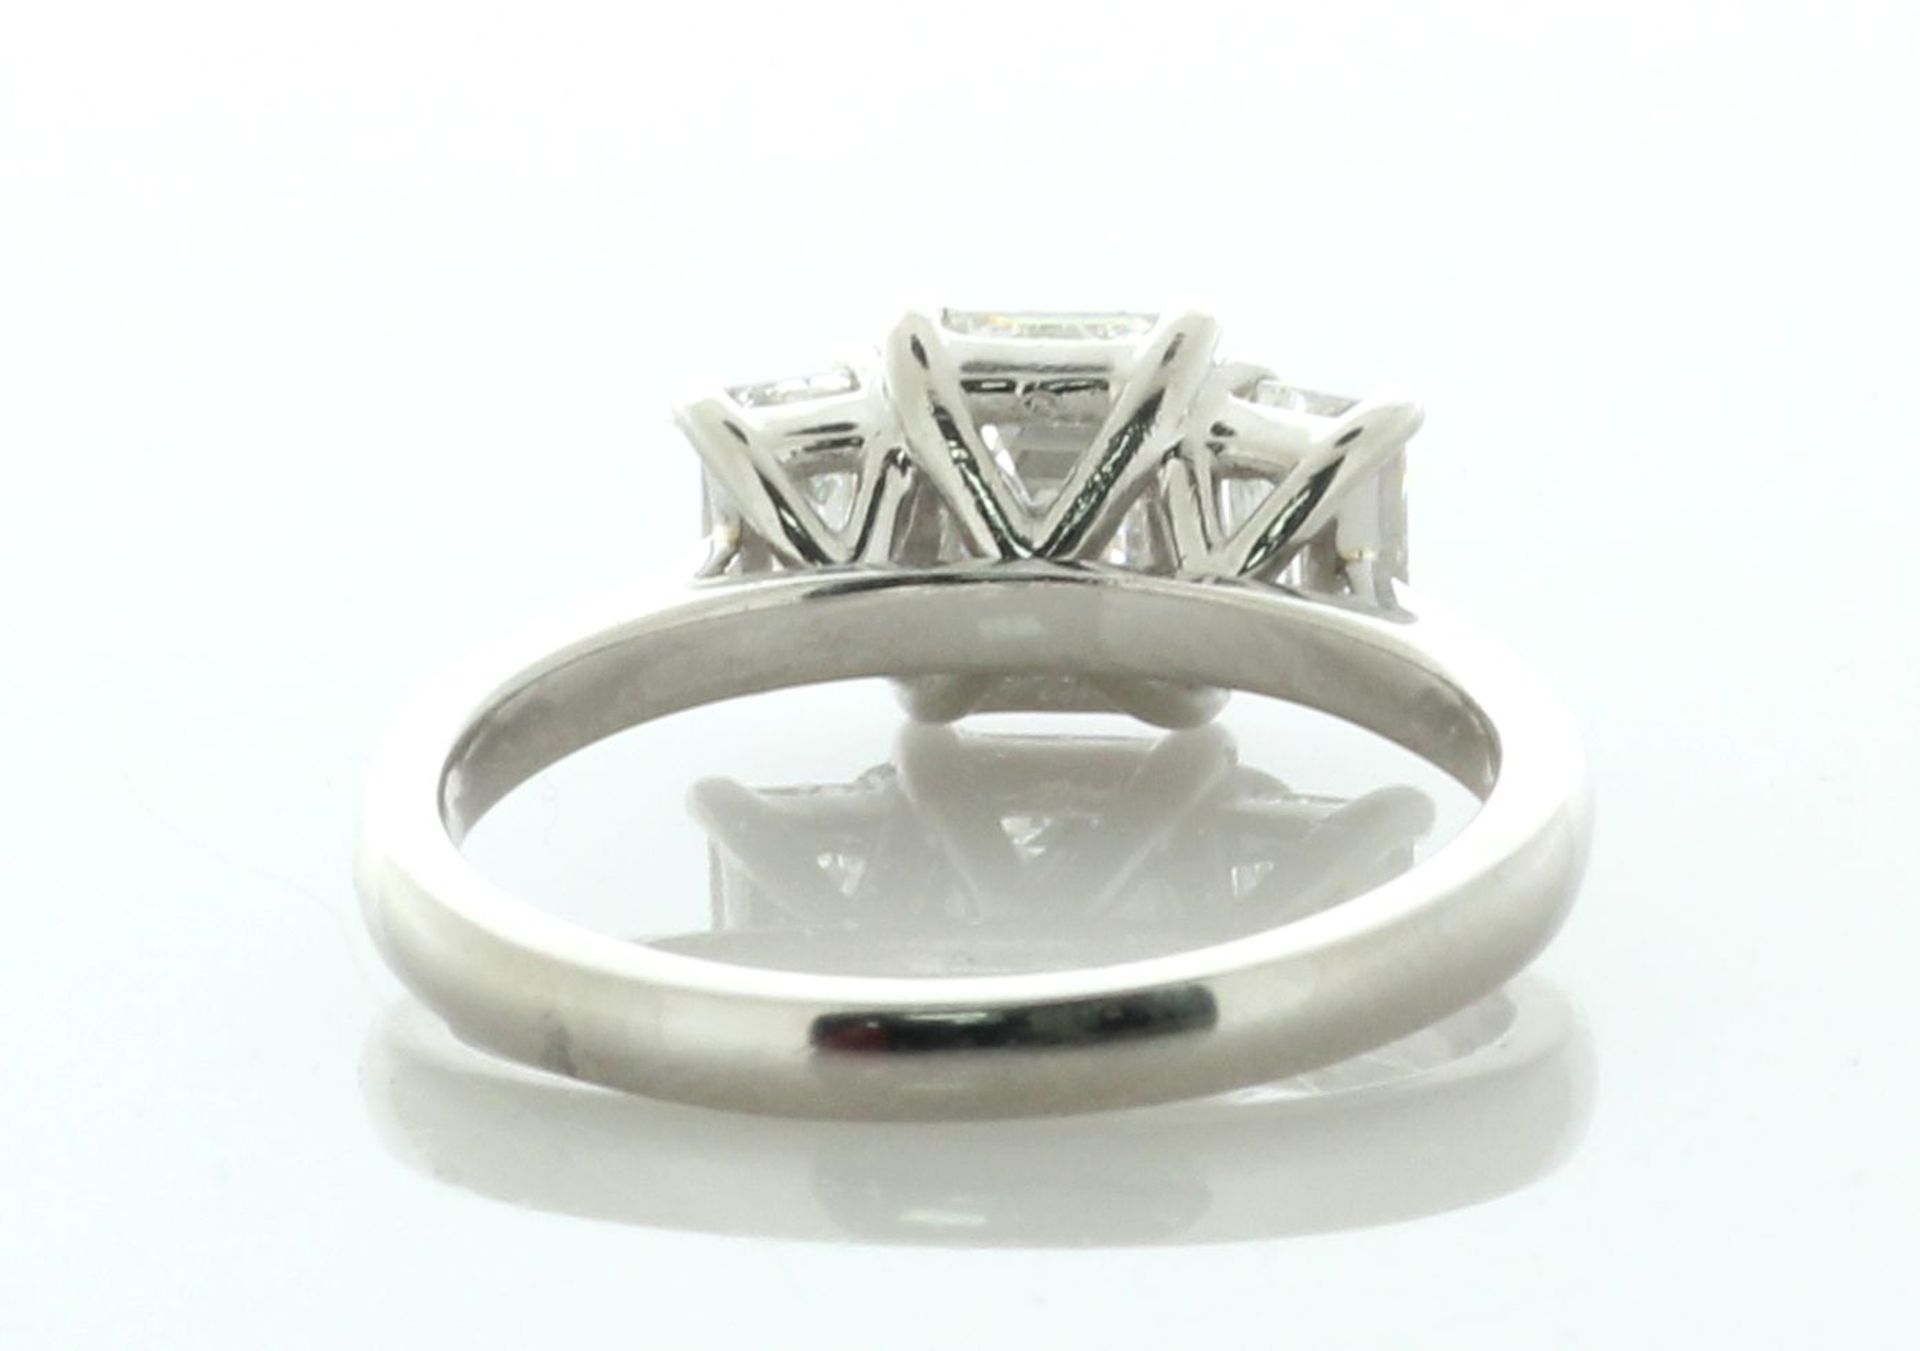 Platinum Three Stone Claw Set Diamond Ring (1.11) 1.91 Carats - Valued By GIE £77,010.00 - This - Image 4 of 5